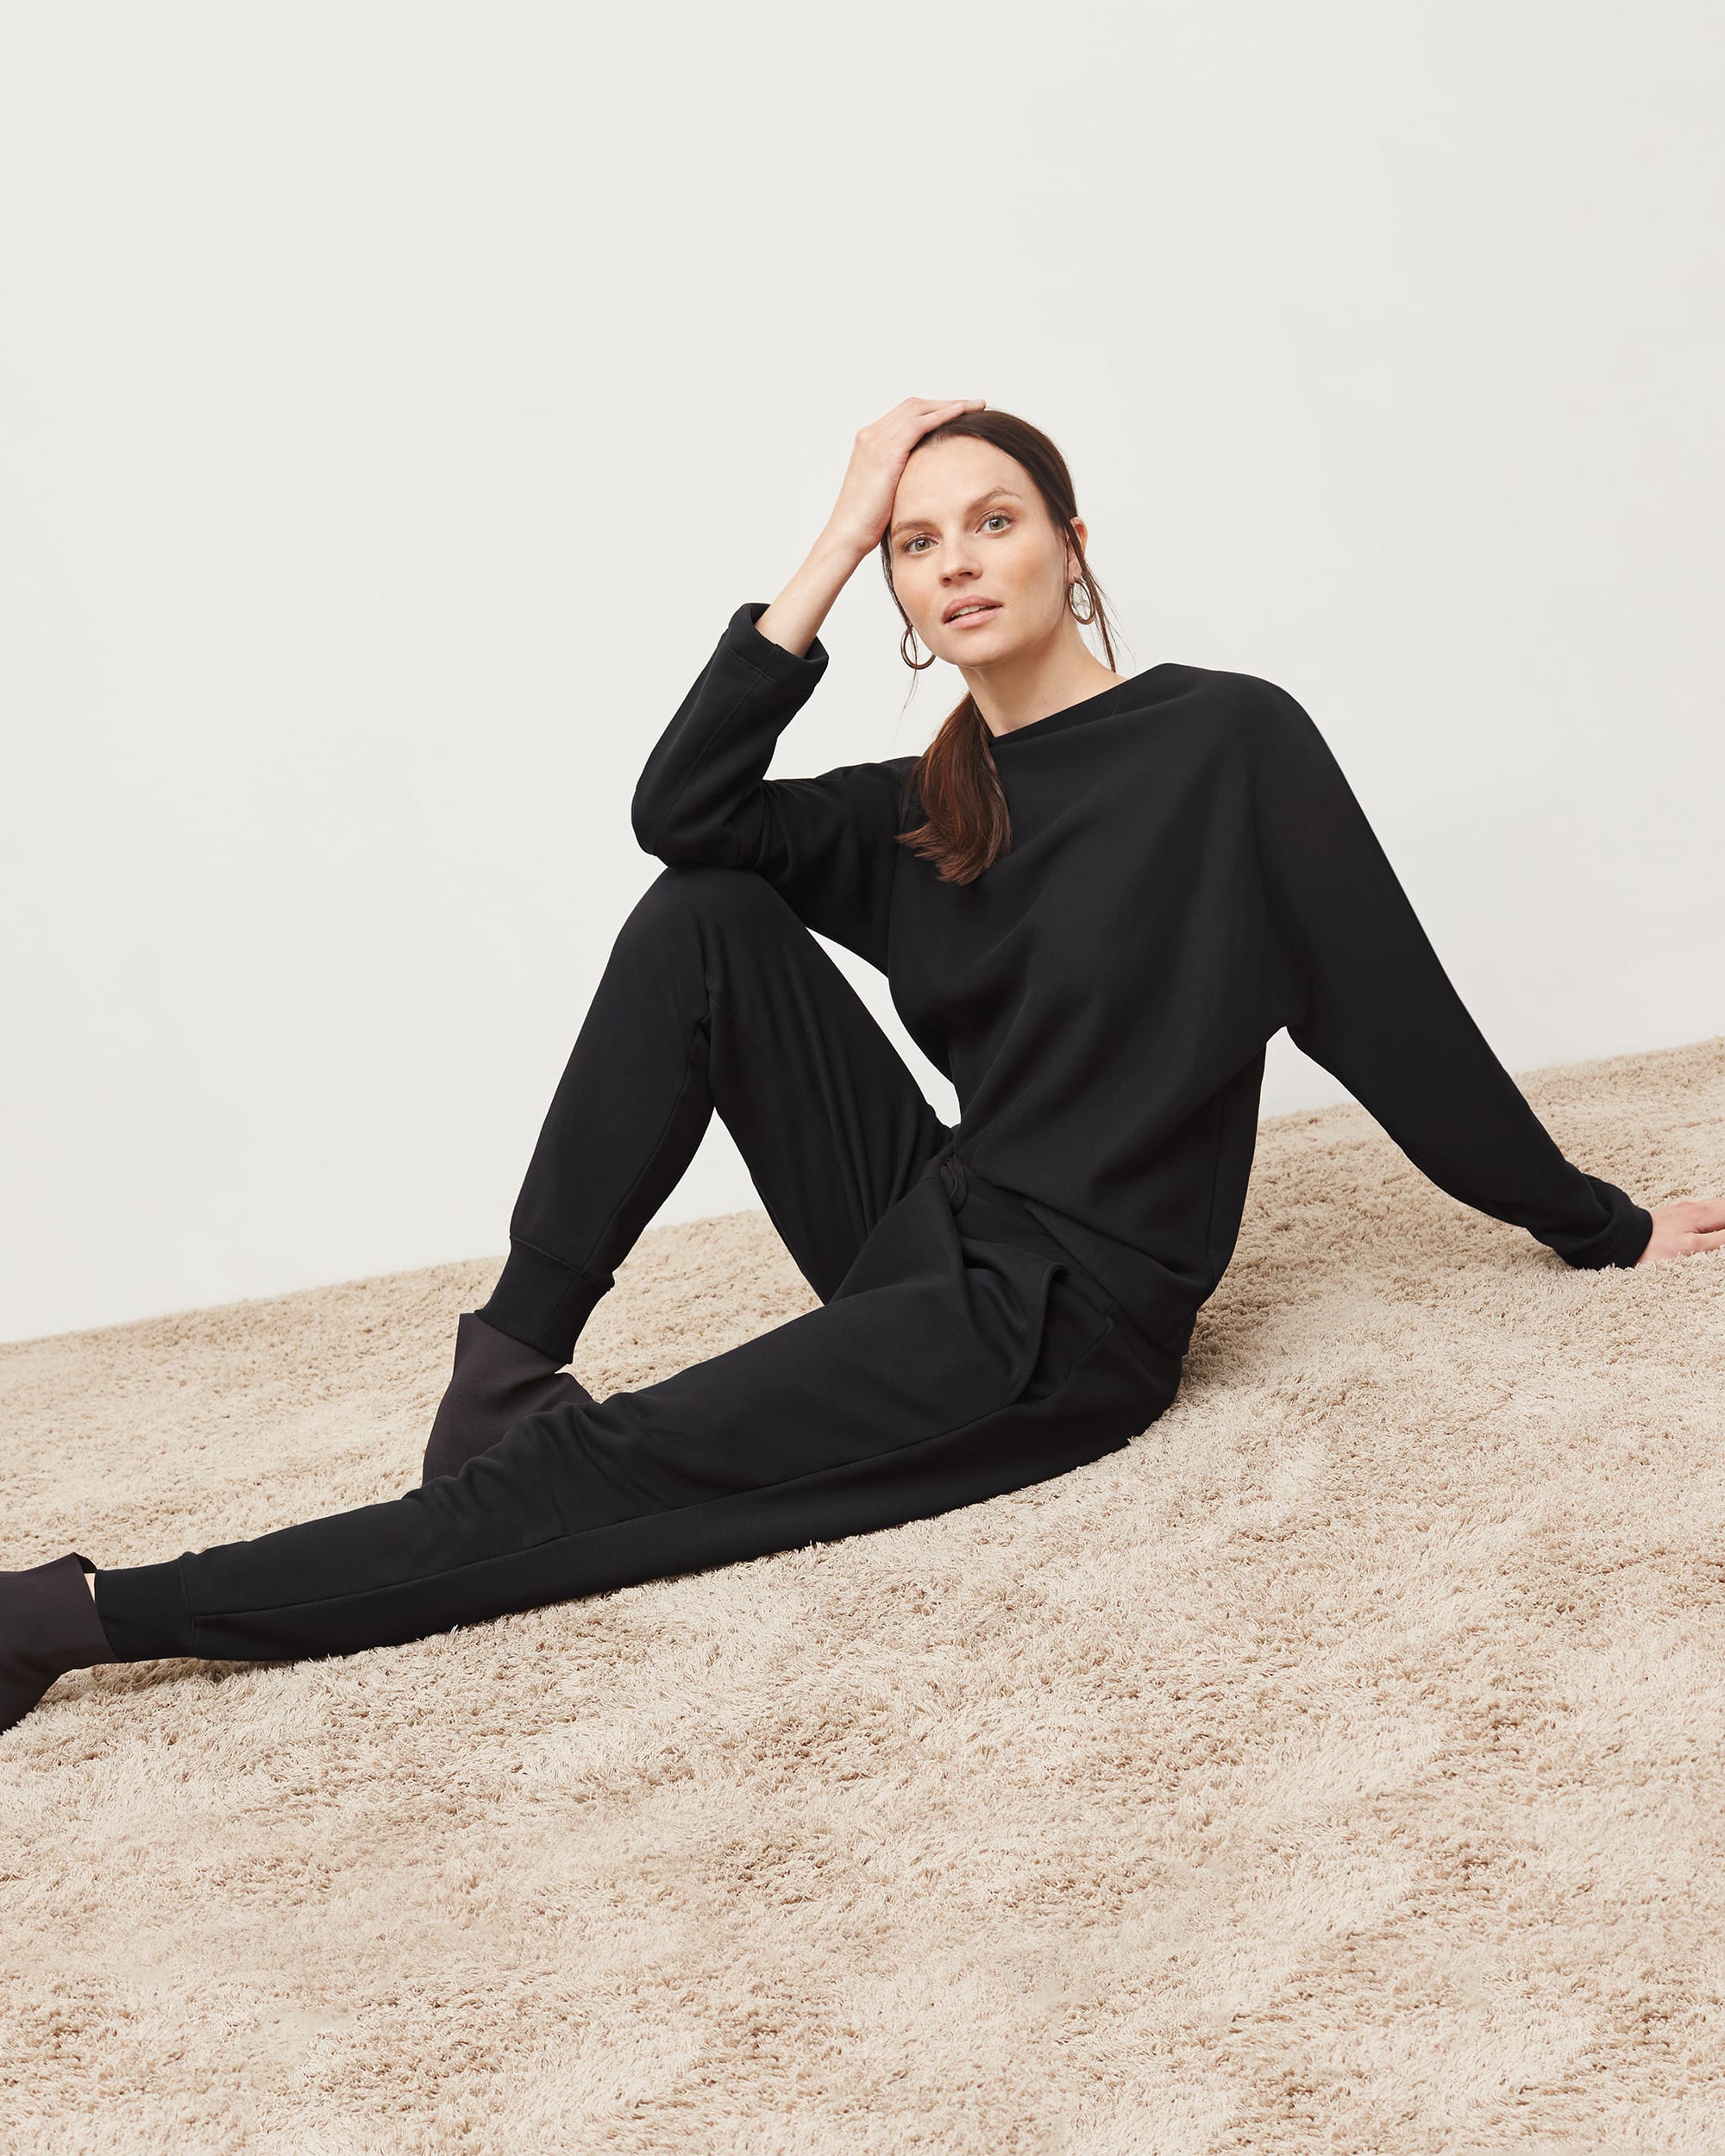 Sweatsuit luxe in cashmere from M.M. LaFleur